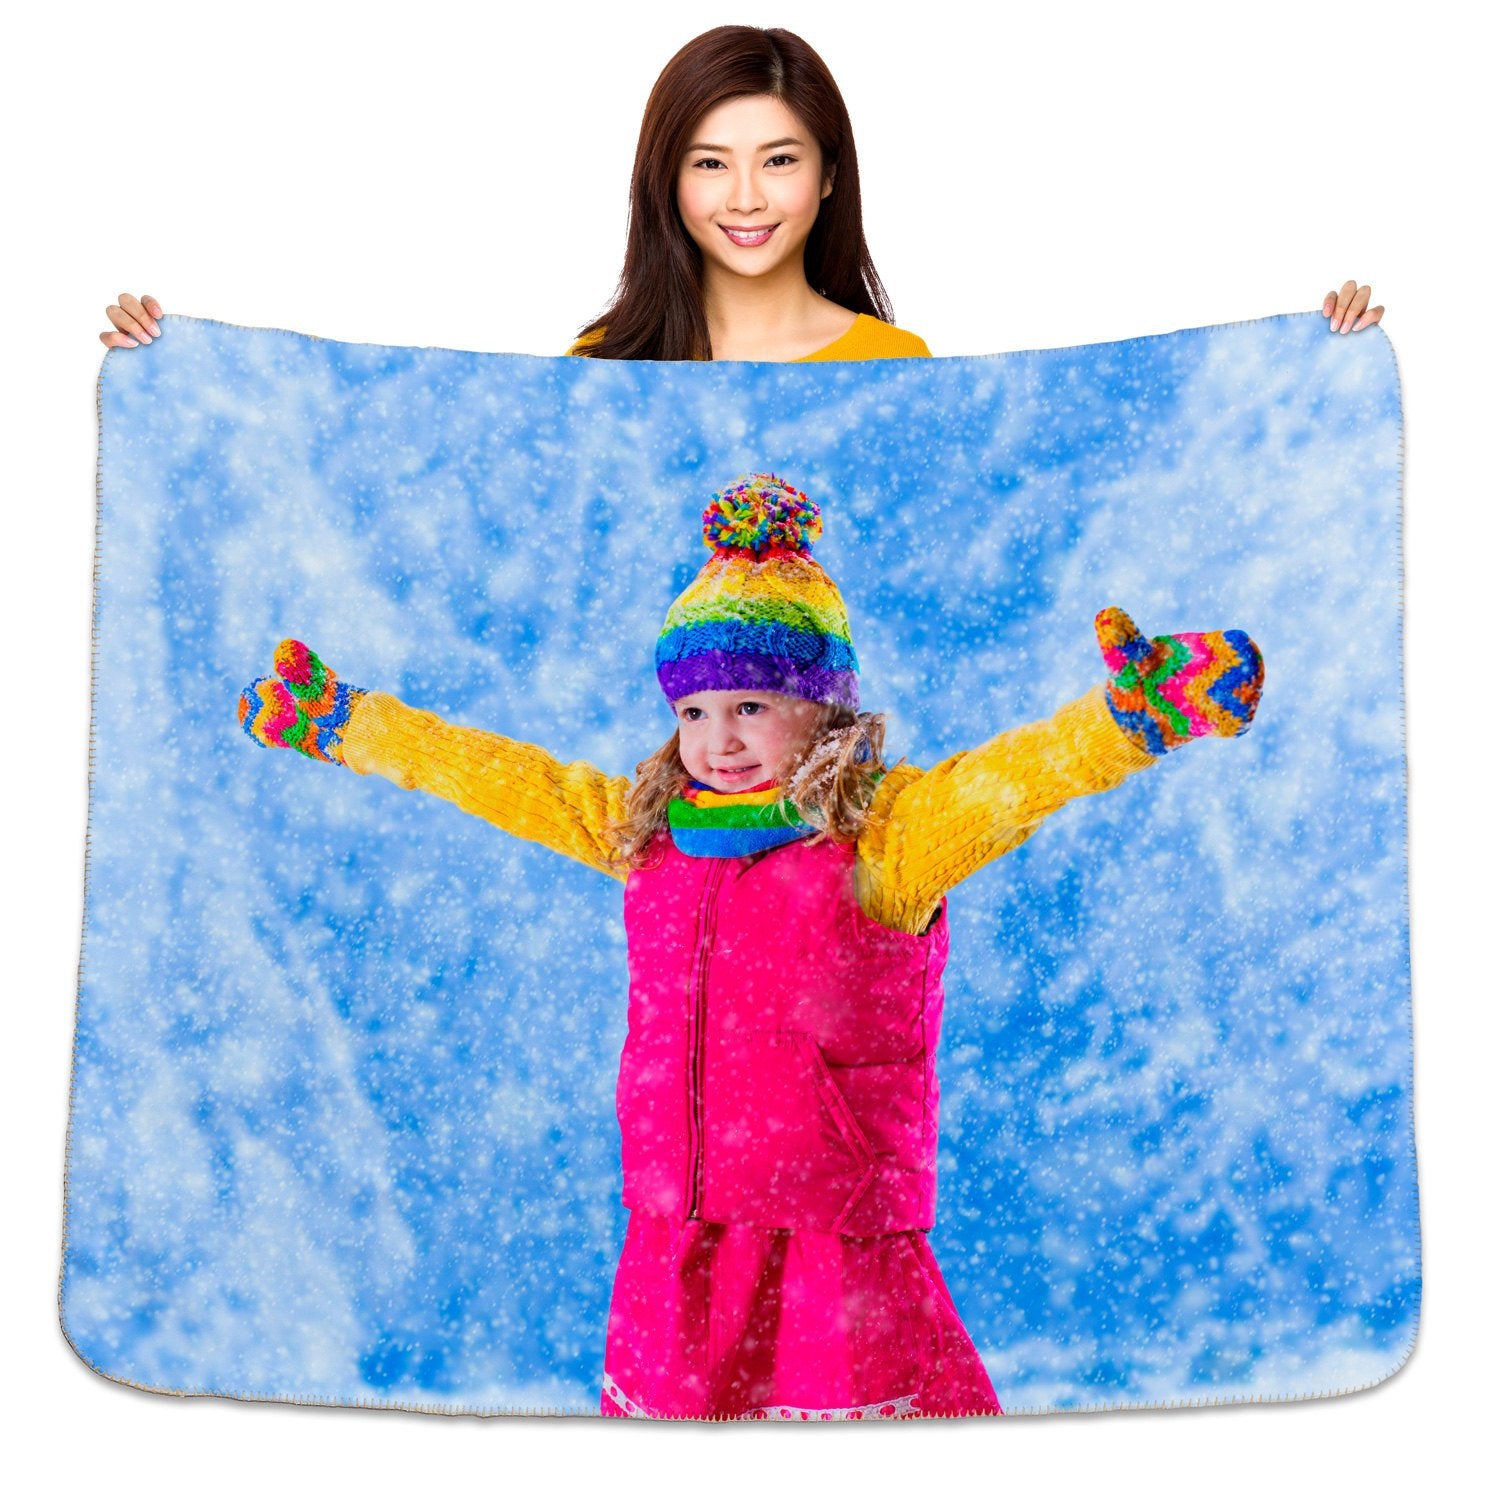 Personalized 60" x 50" Photo / Image Sherpa Throw Blanket